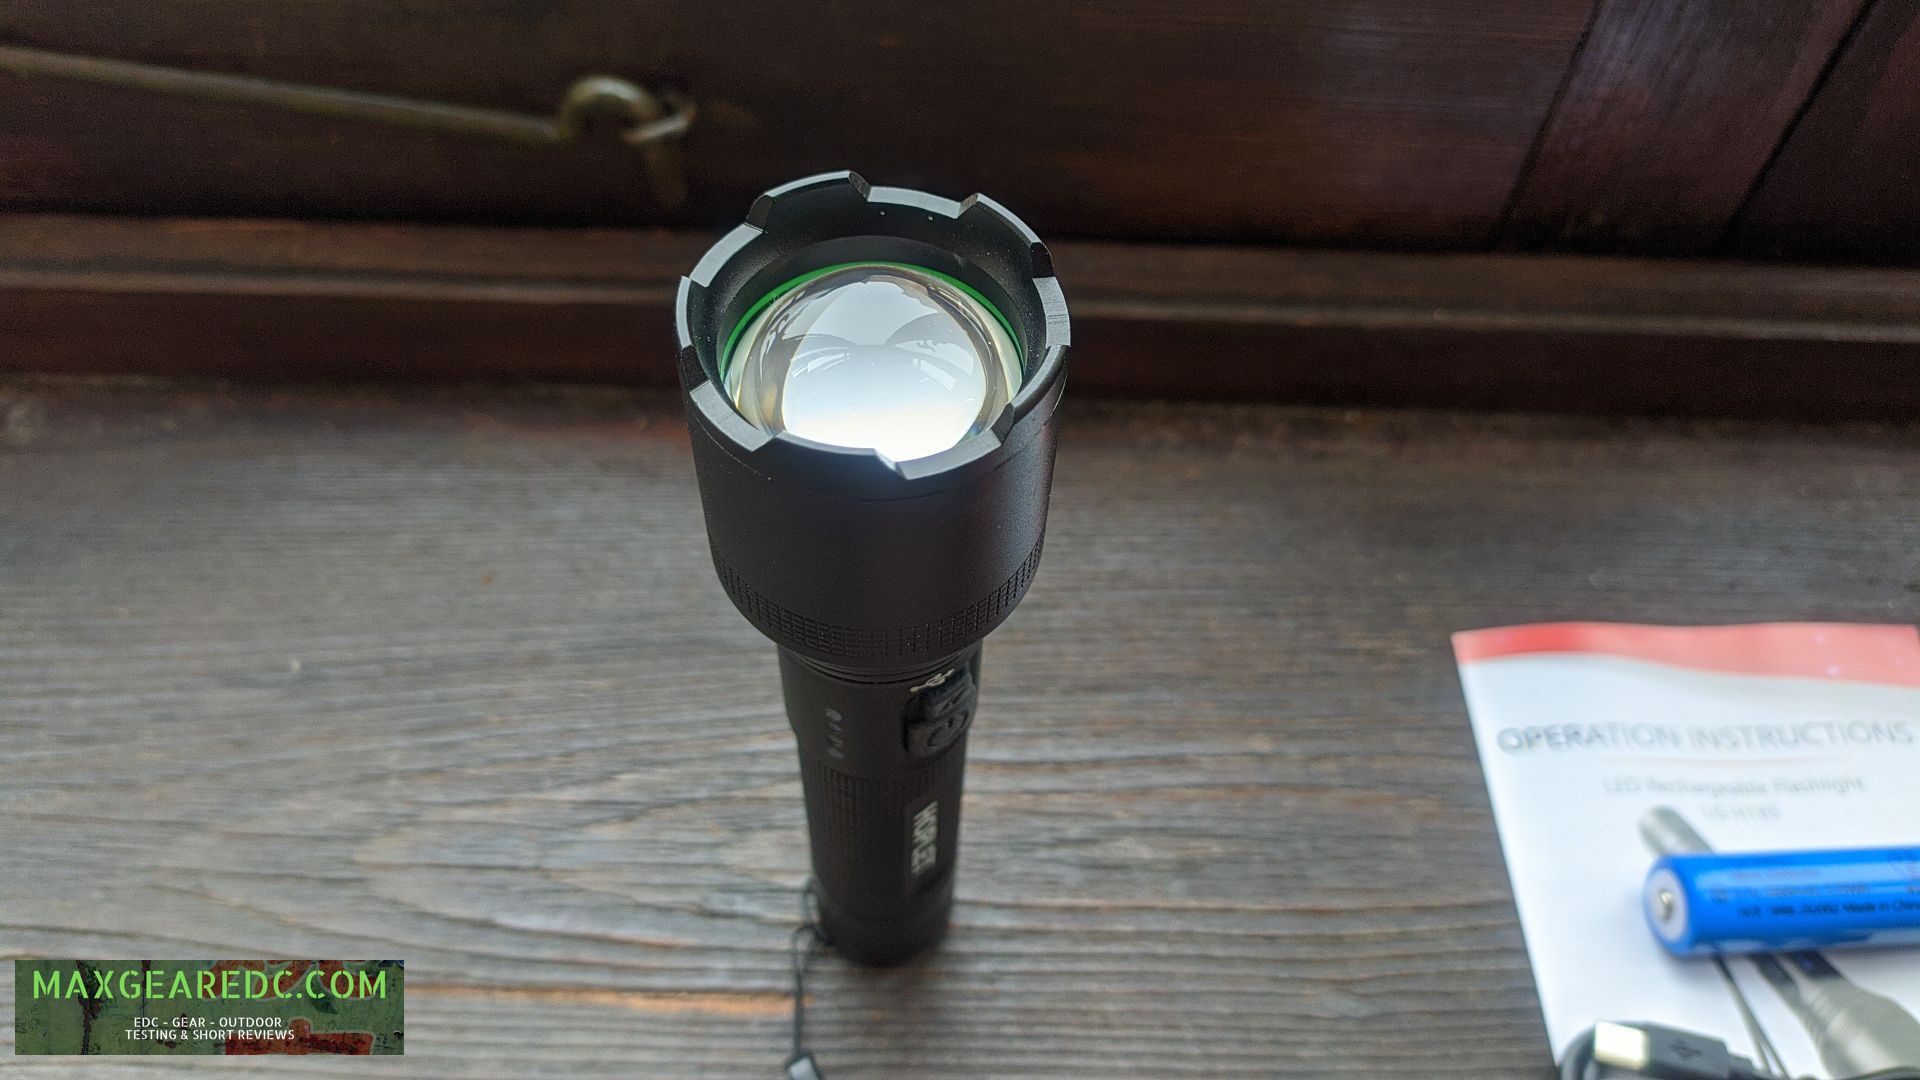 Hoplet_US_H185_Flashlight_Review_zoom_18650_maxgearedc.com_EDC_GEAR_OUTDOOR_TESTING_and_SHORT_REVIEWS_5